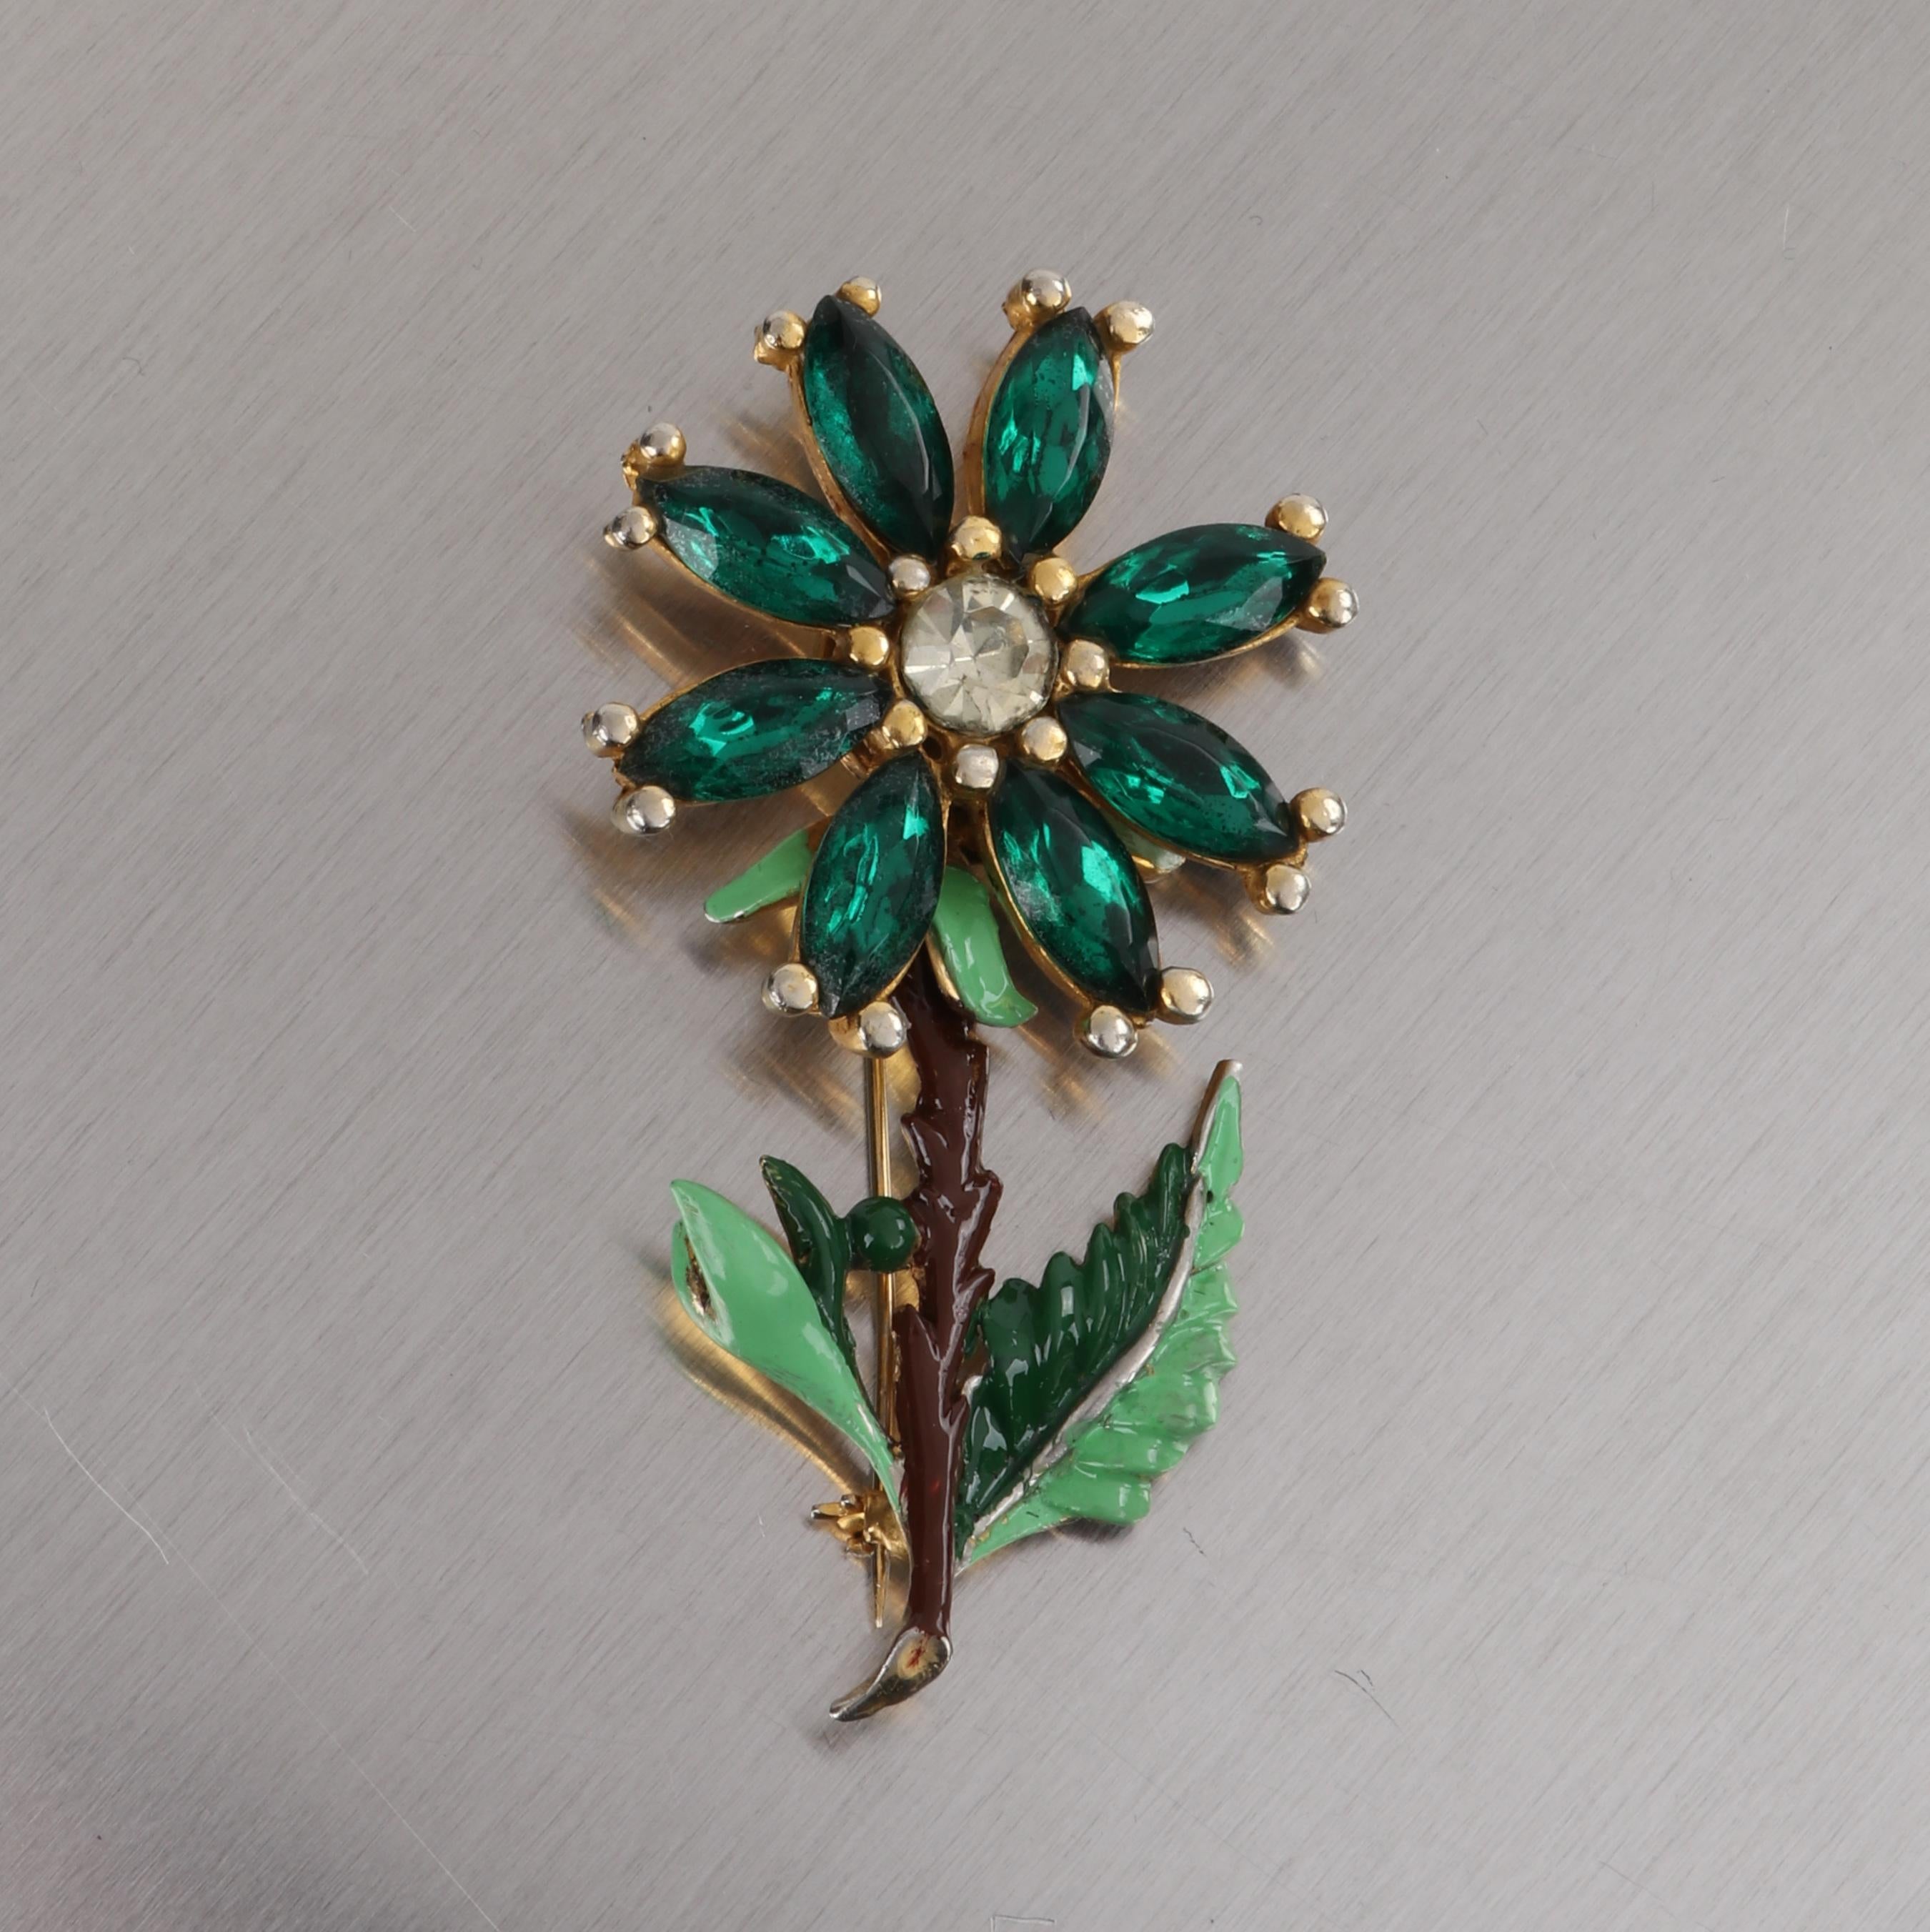 CHANEL S/S 1941 Green Glass Rhinestone Enamel Flower Brooch Pin
 
Brand / Manufacturer: Reinad / Chanel Novelty Company
Collection: Spring / Summer 1941
Style: Brooch Pin
Color(s): Shades of green, white (stones); shades of green, brown (enamel);